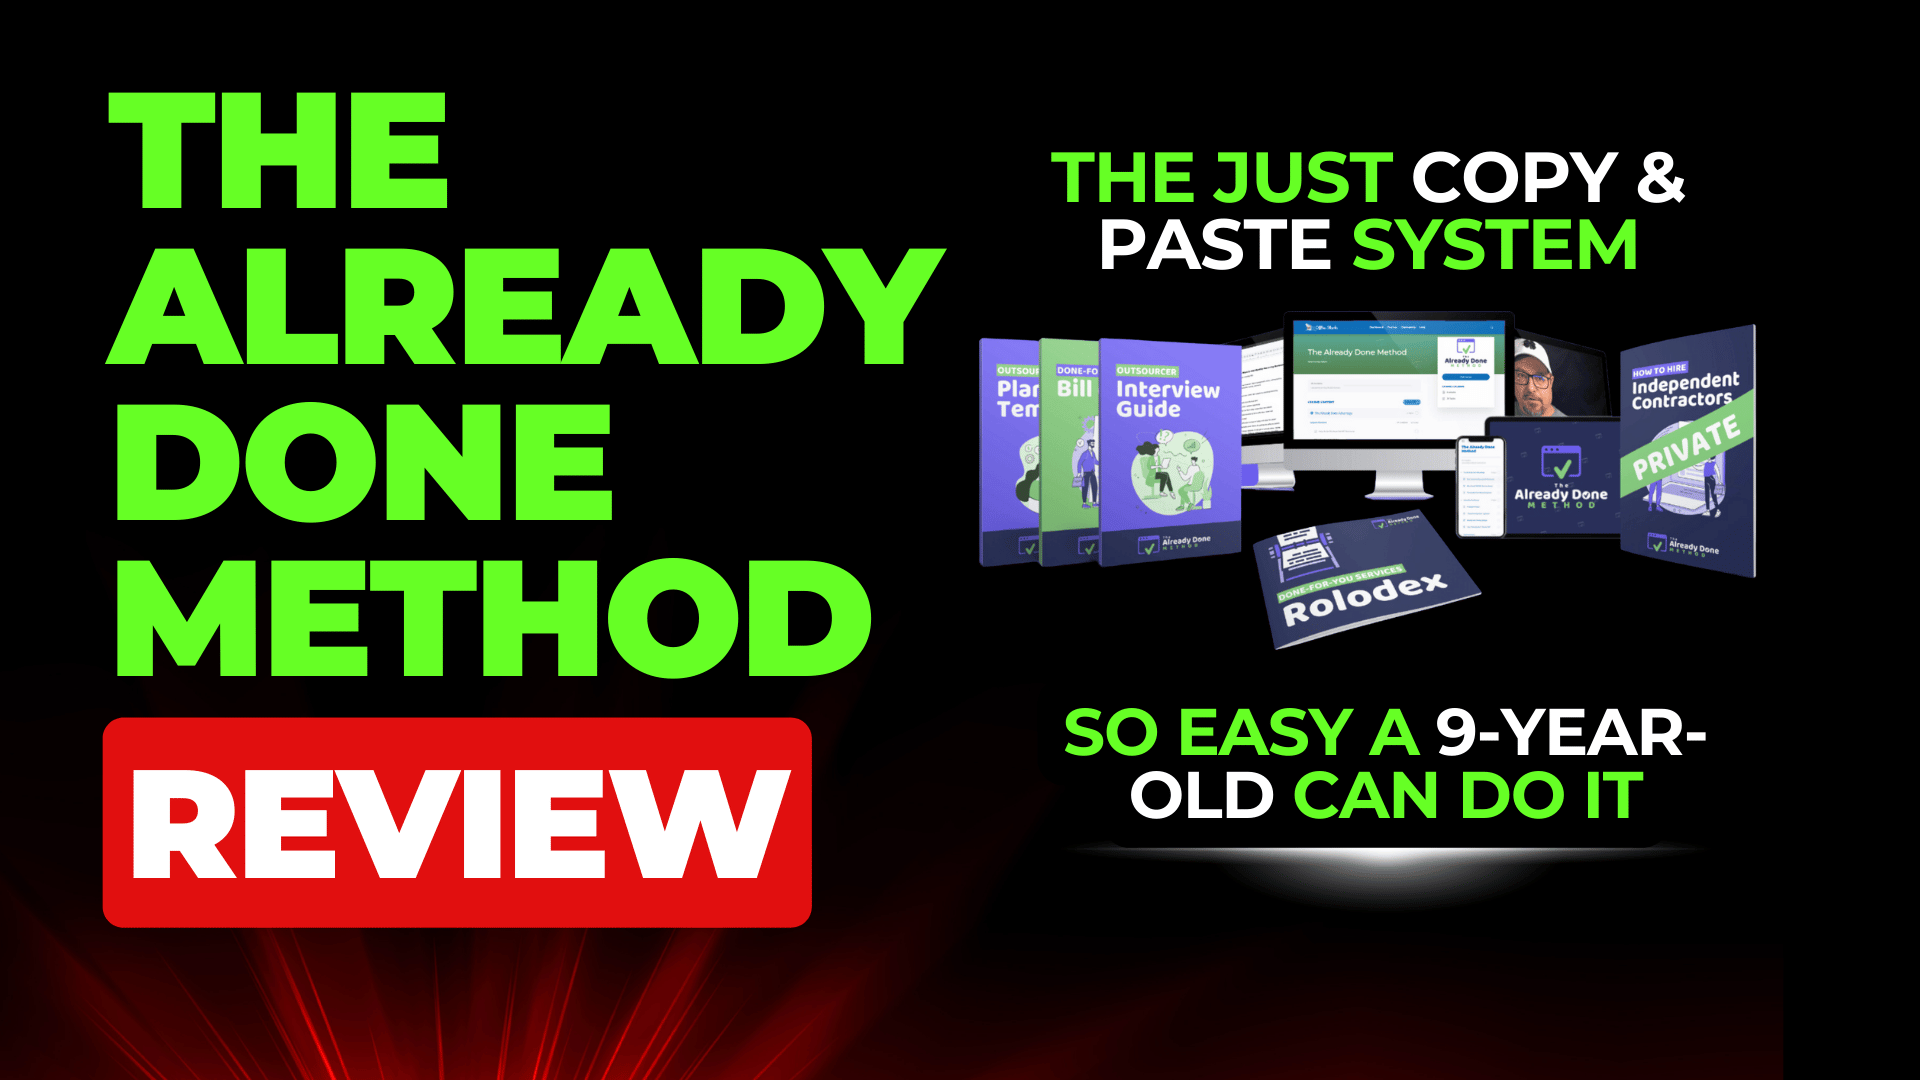 The Already Done Method Review